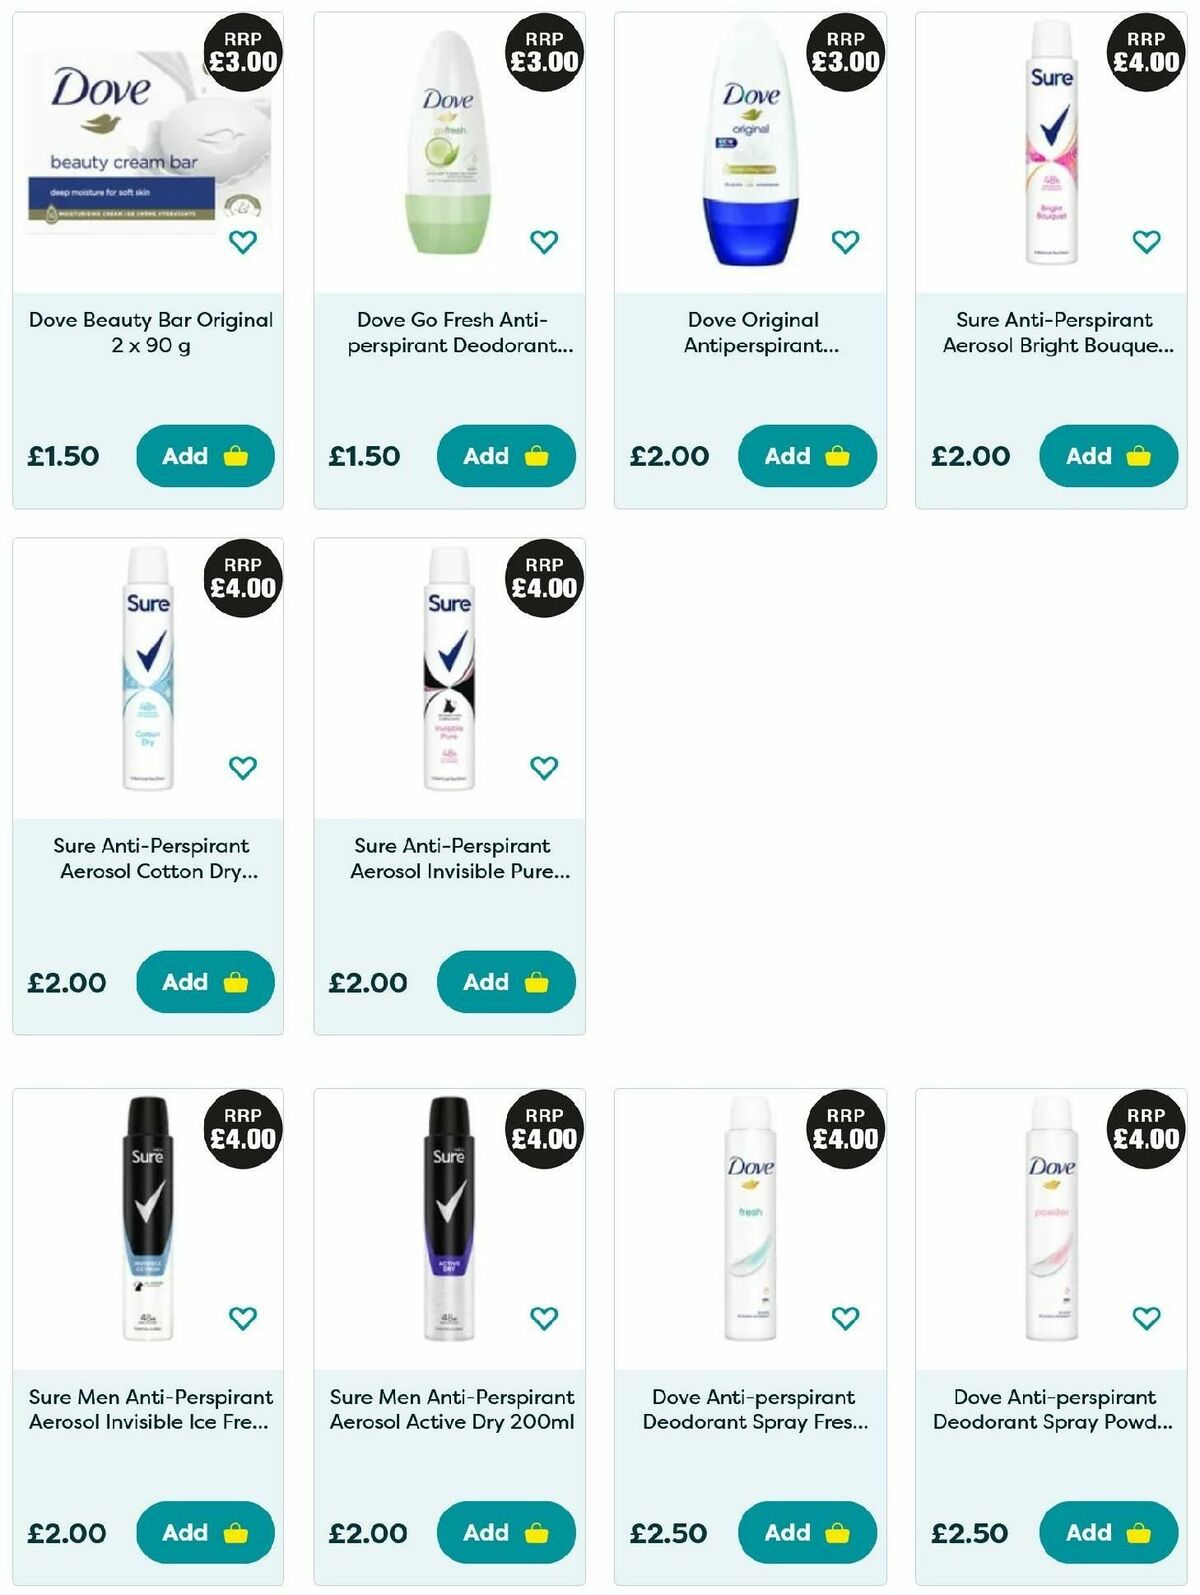 Poundland Offers from 26 September